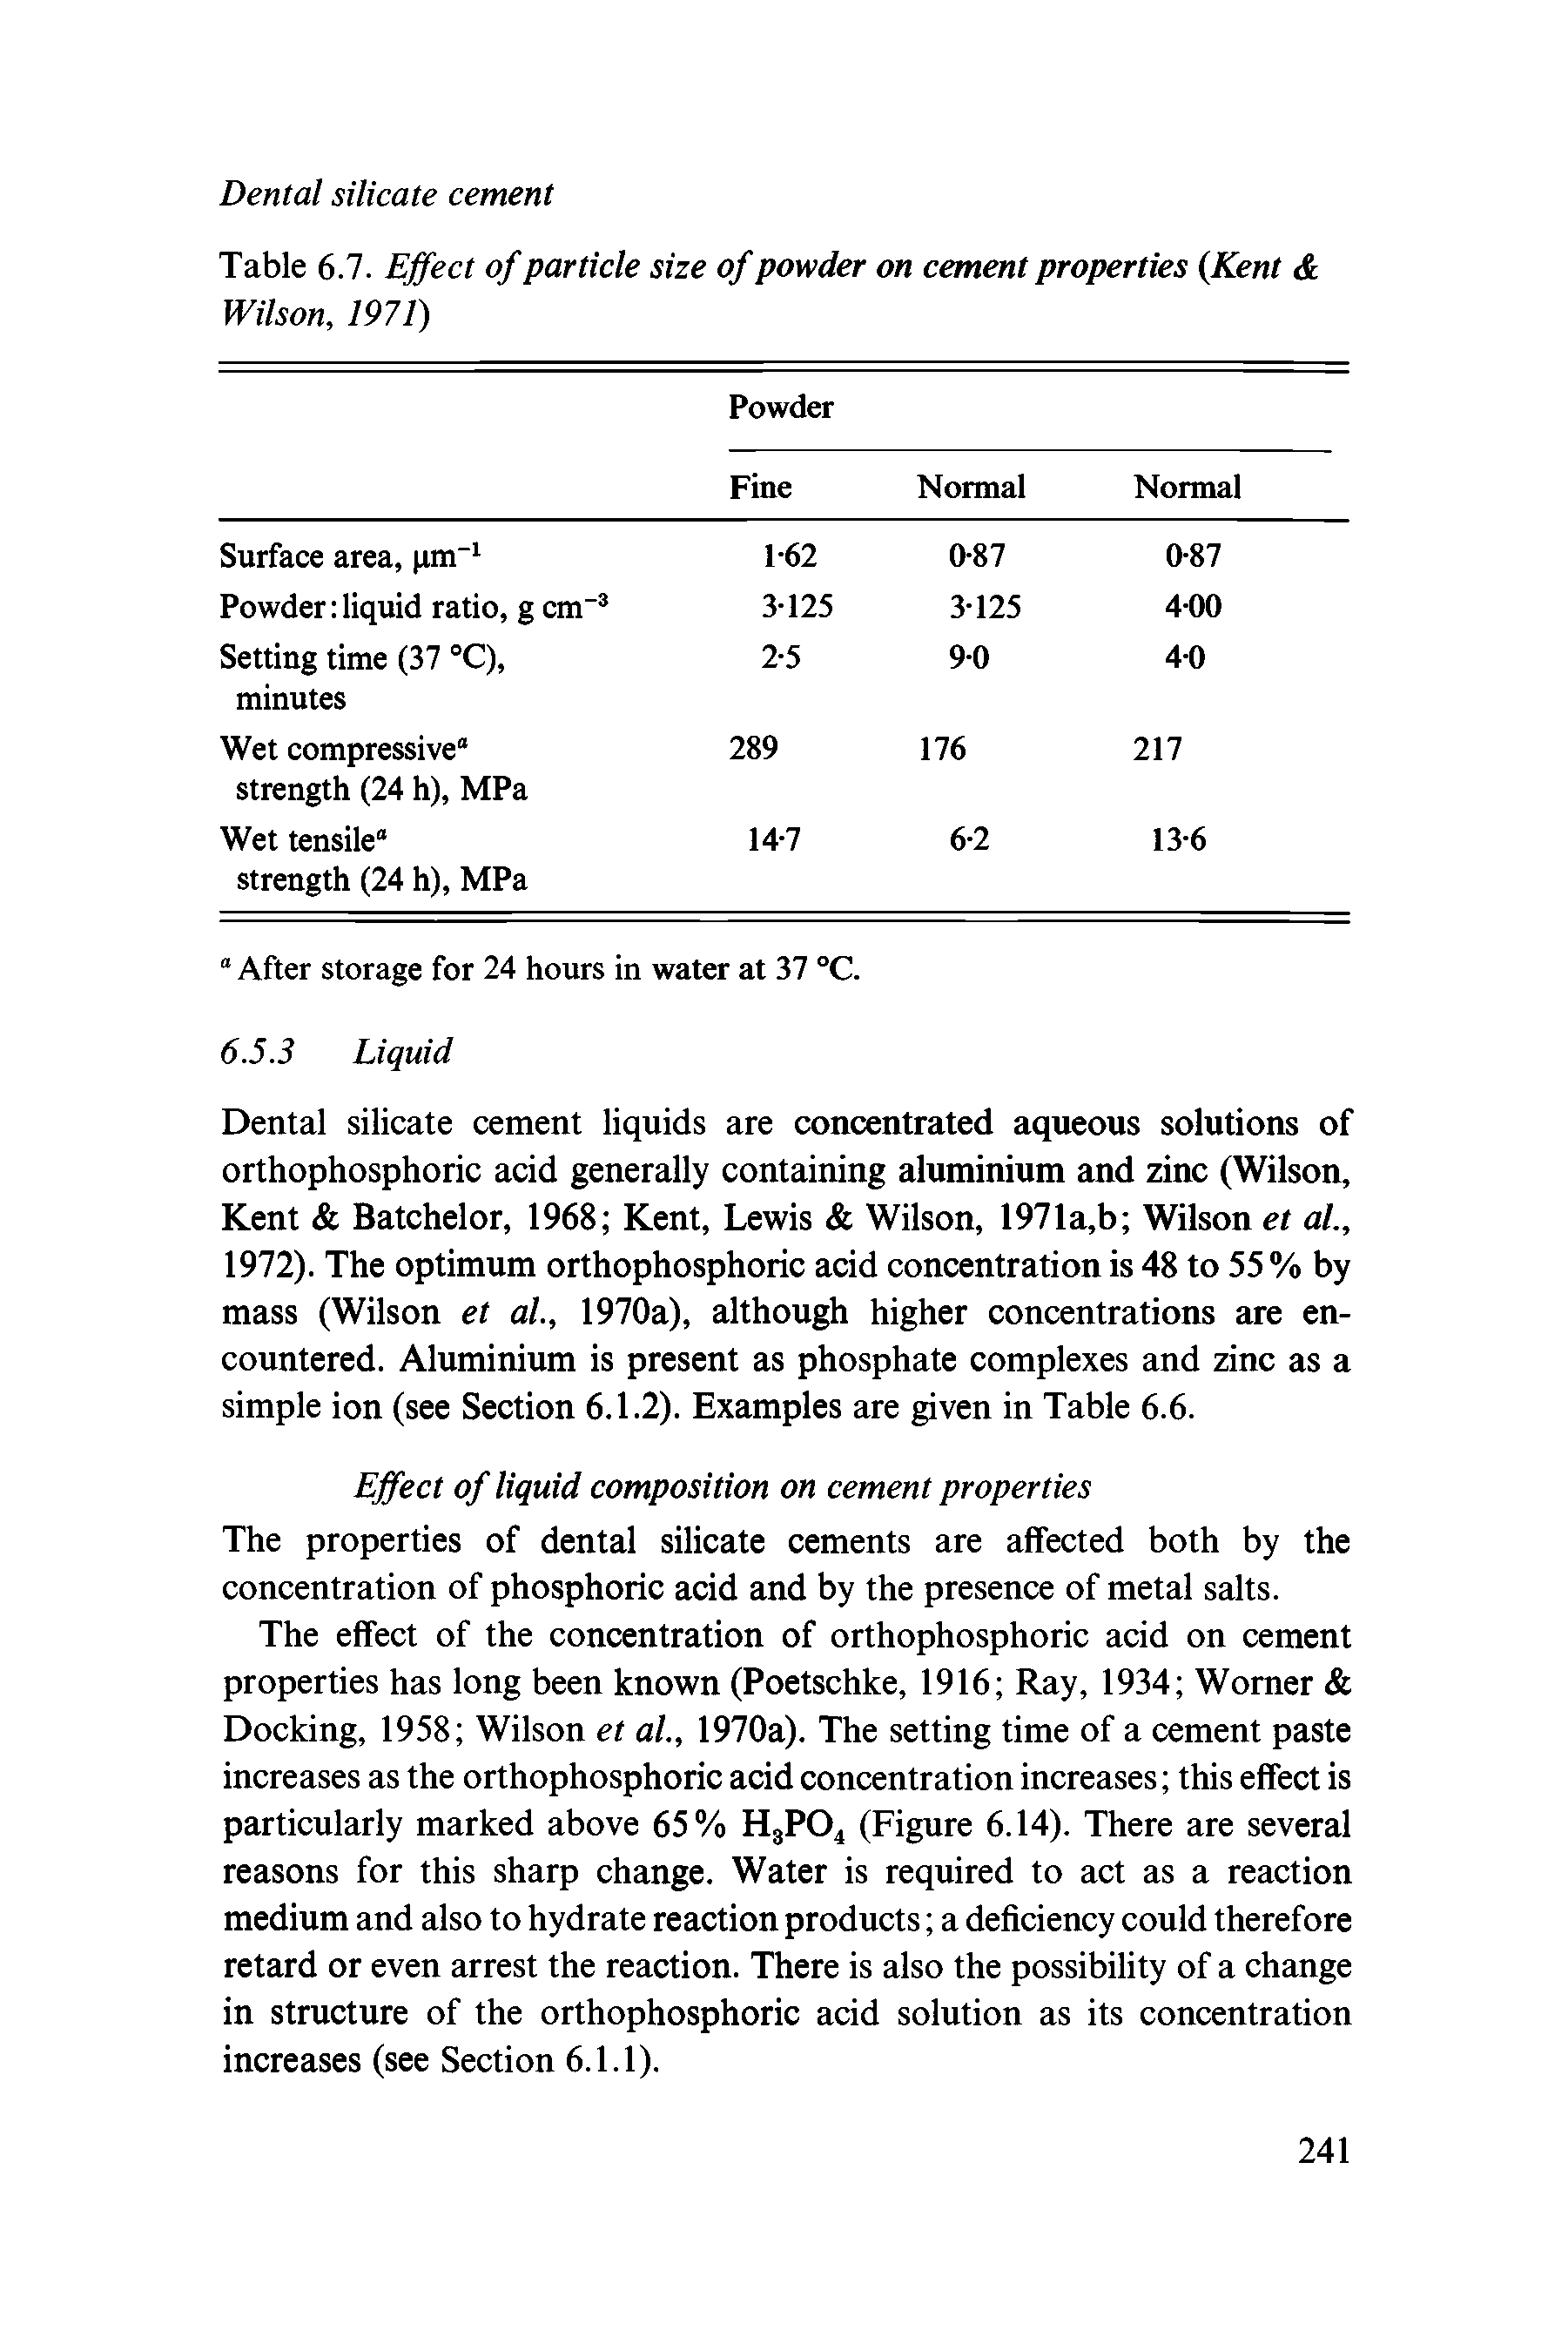 Table 6.7. Effect of particle size of powder on cement properties Kent Wilson, 1971)...